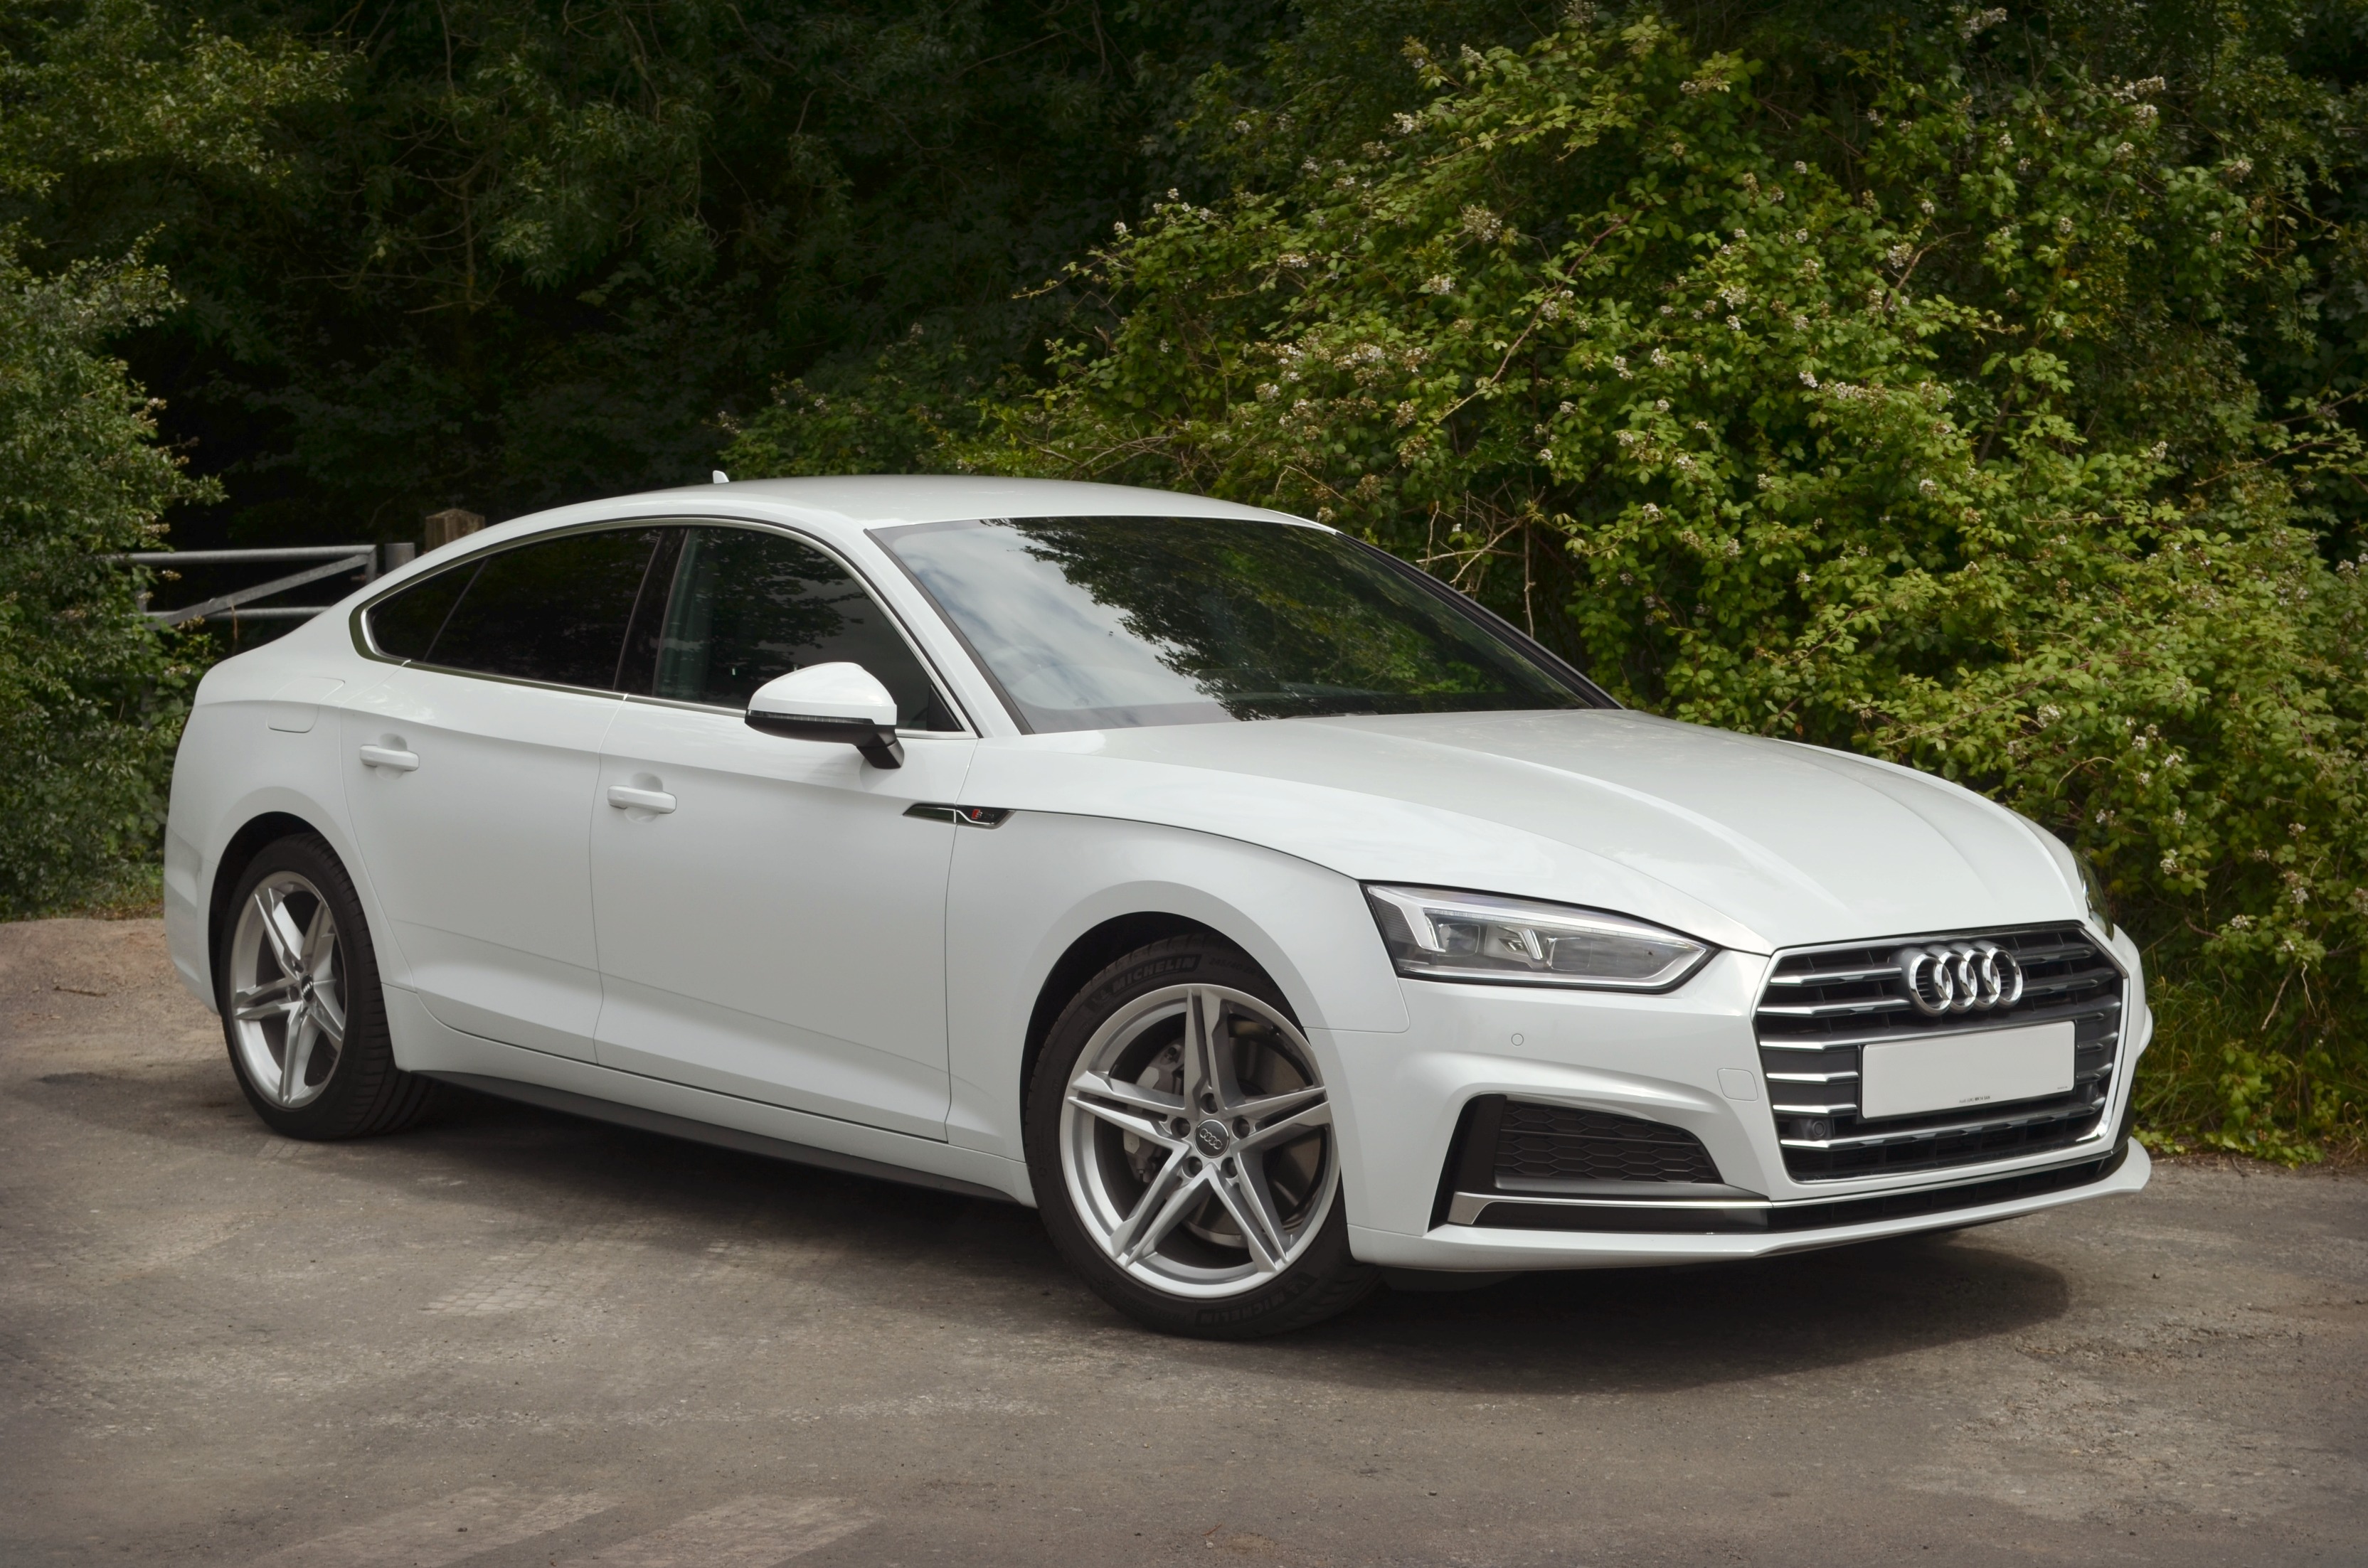 Audi A5 S Line Ultra Drive South West Luxury Prestige amp Sports car hire in Wiltshire Somerset